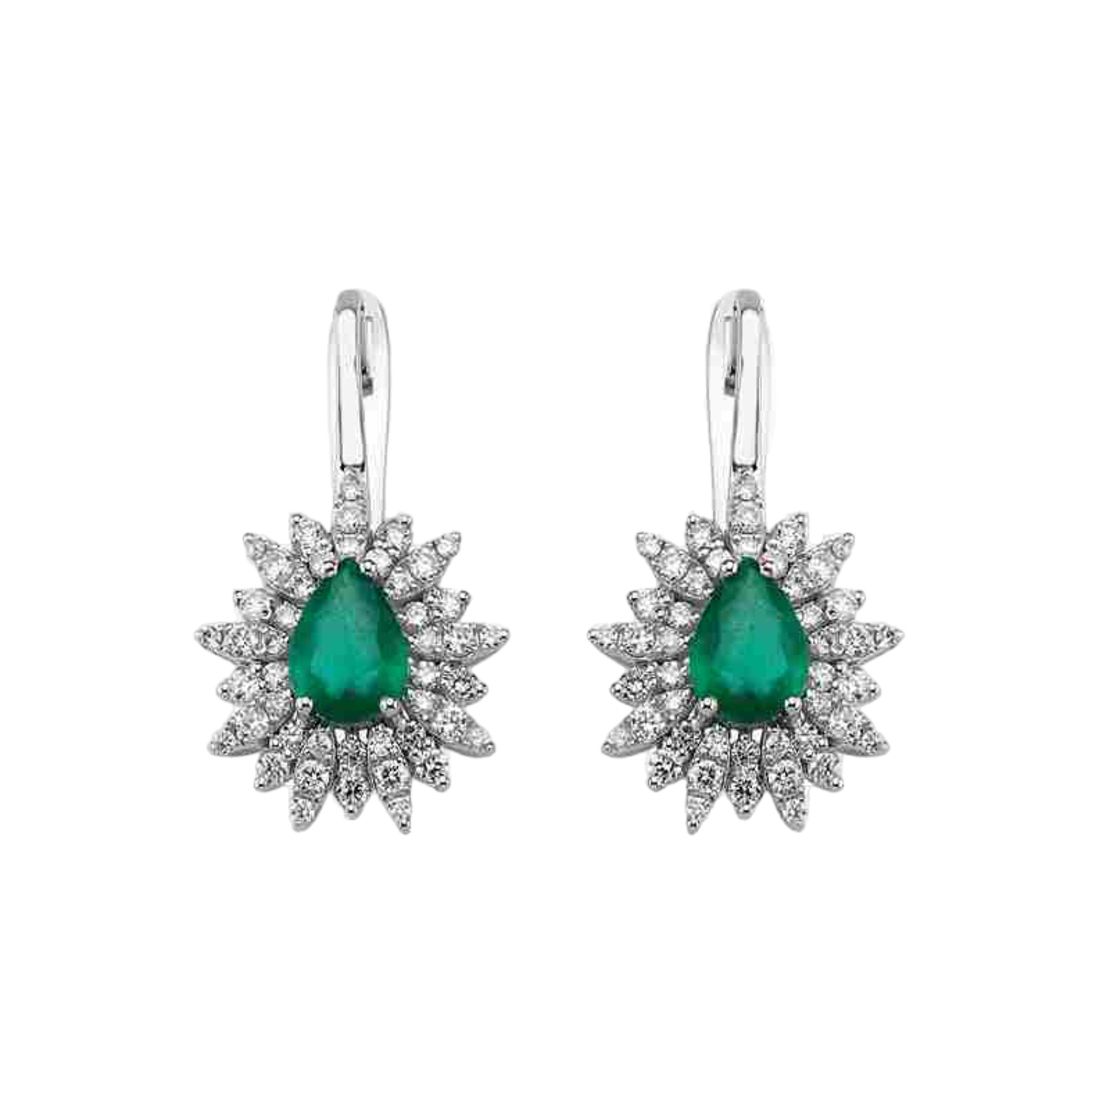 2.94 ct Set with emeralds and diamonds